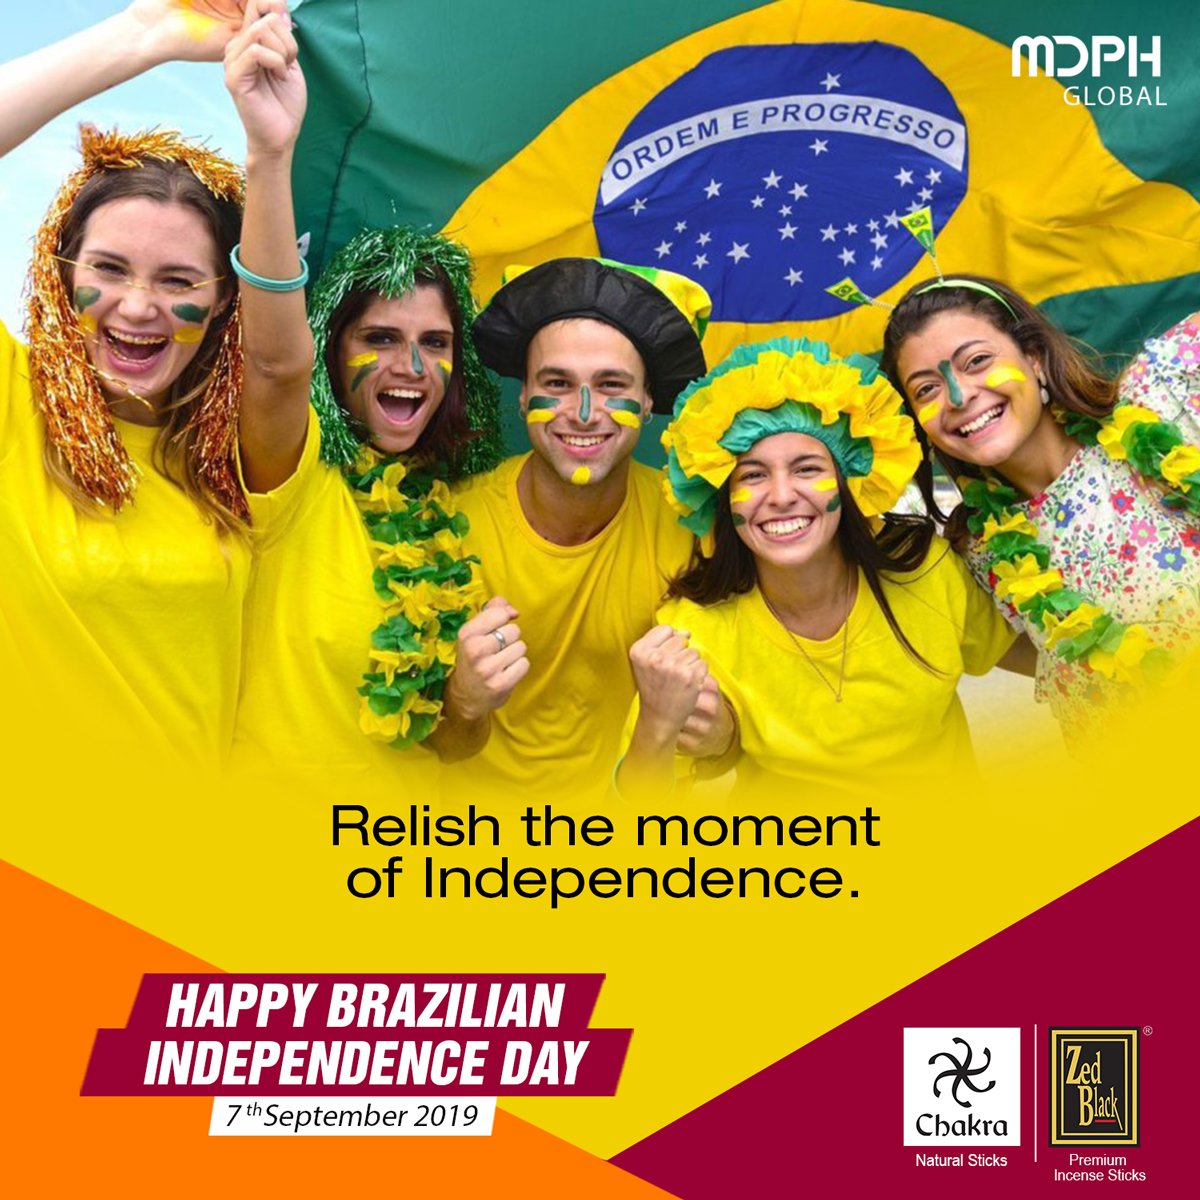 We wish all blissful Brazilians a Happy Independence Day.

#IndependenceDay #Brazil #September #Parades #concerts #celebrates #brazilian #Brasil #National #holiday #happy #MDPHGlobal #ZedBlack #ChakraAroma #aroma #chakra #Incense #premium #natural #moment #Independence